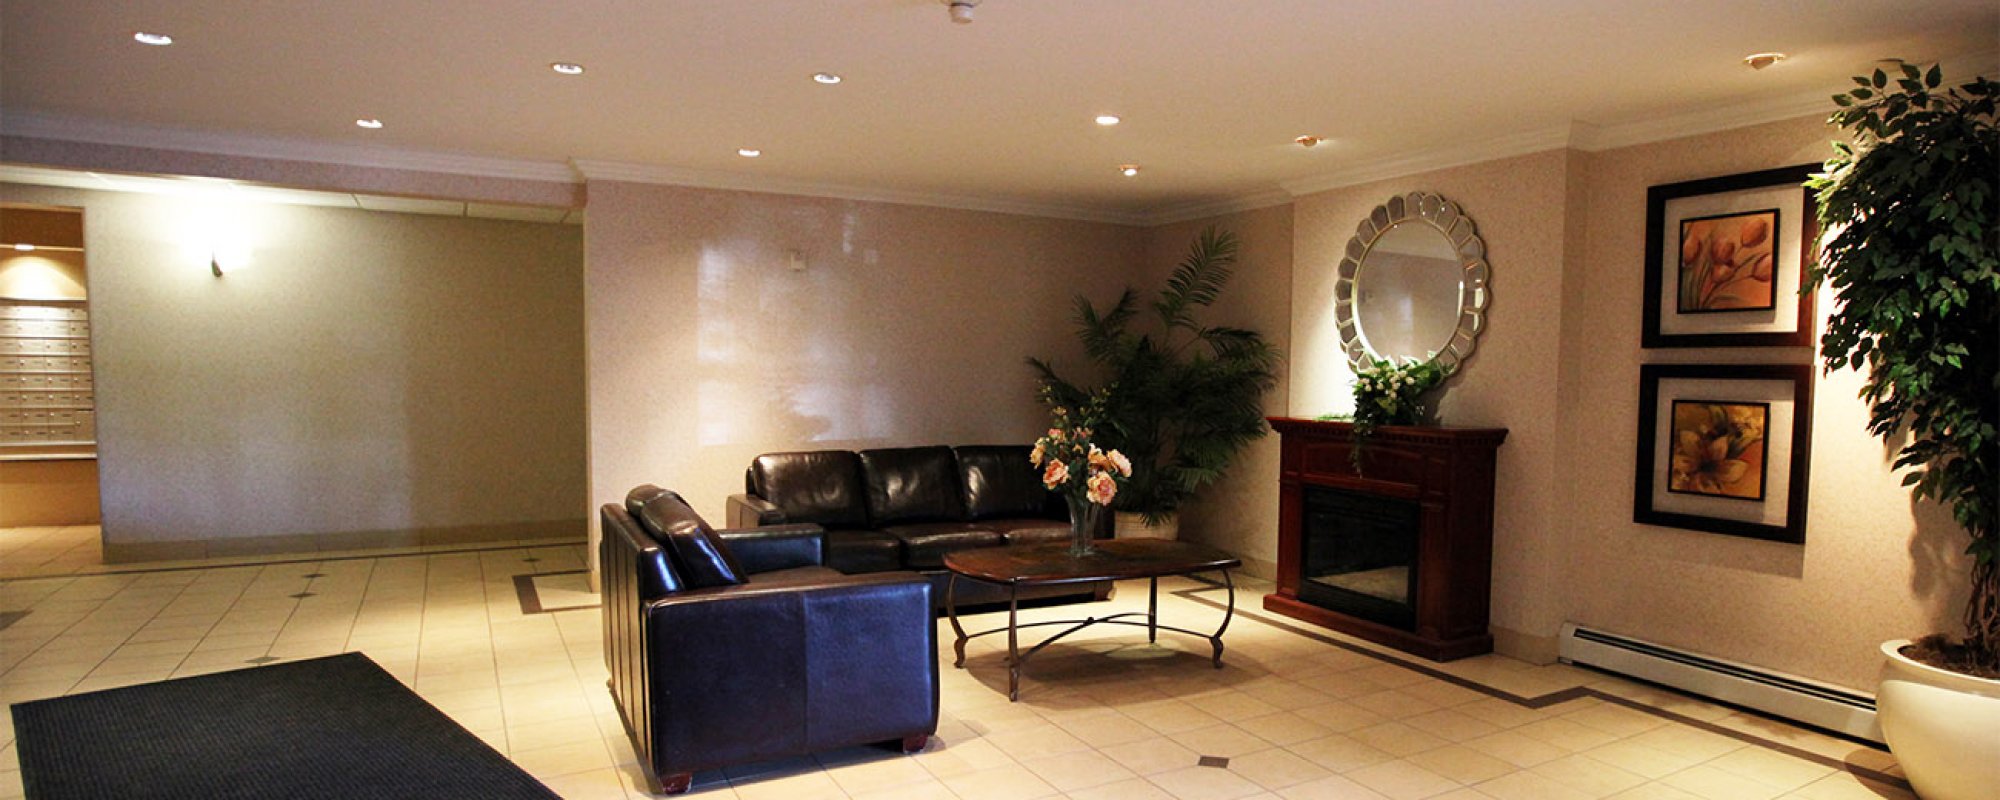 A lounge in a residential apartment in London, Ontario